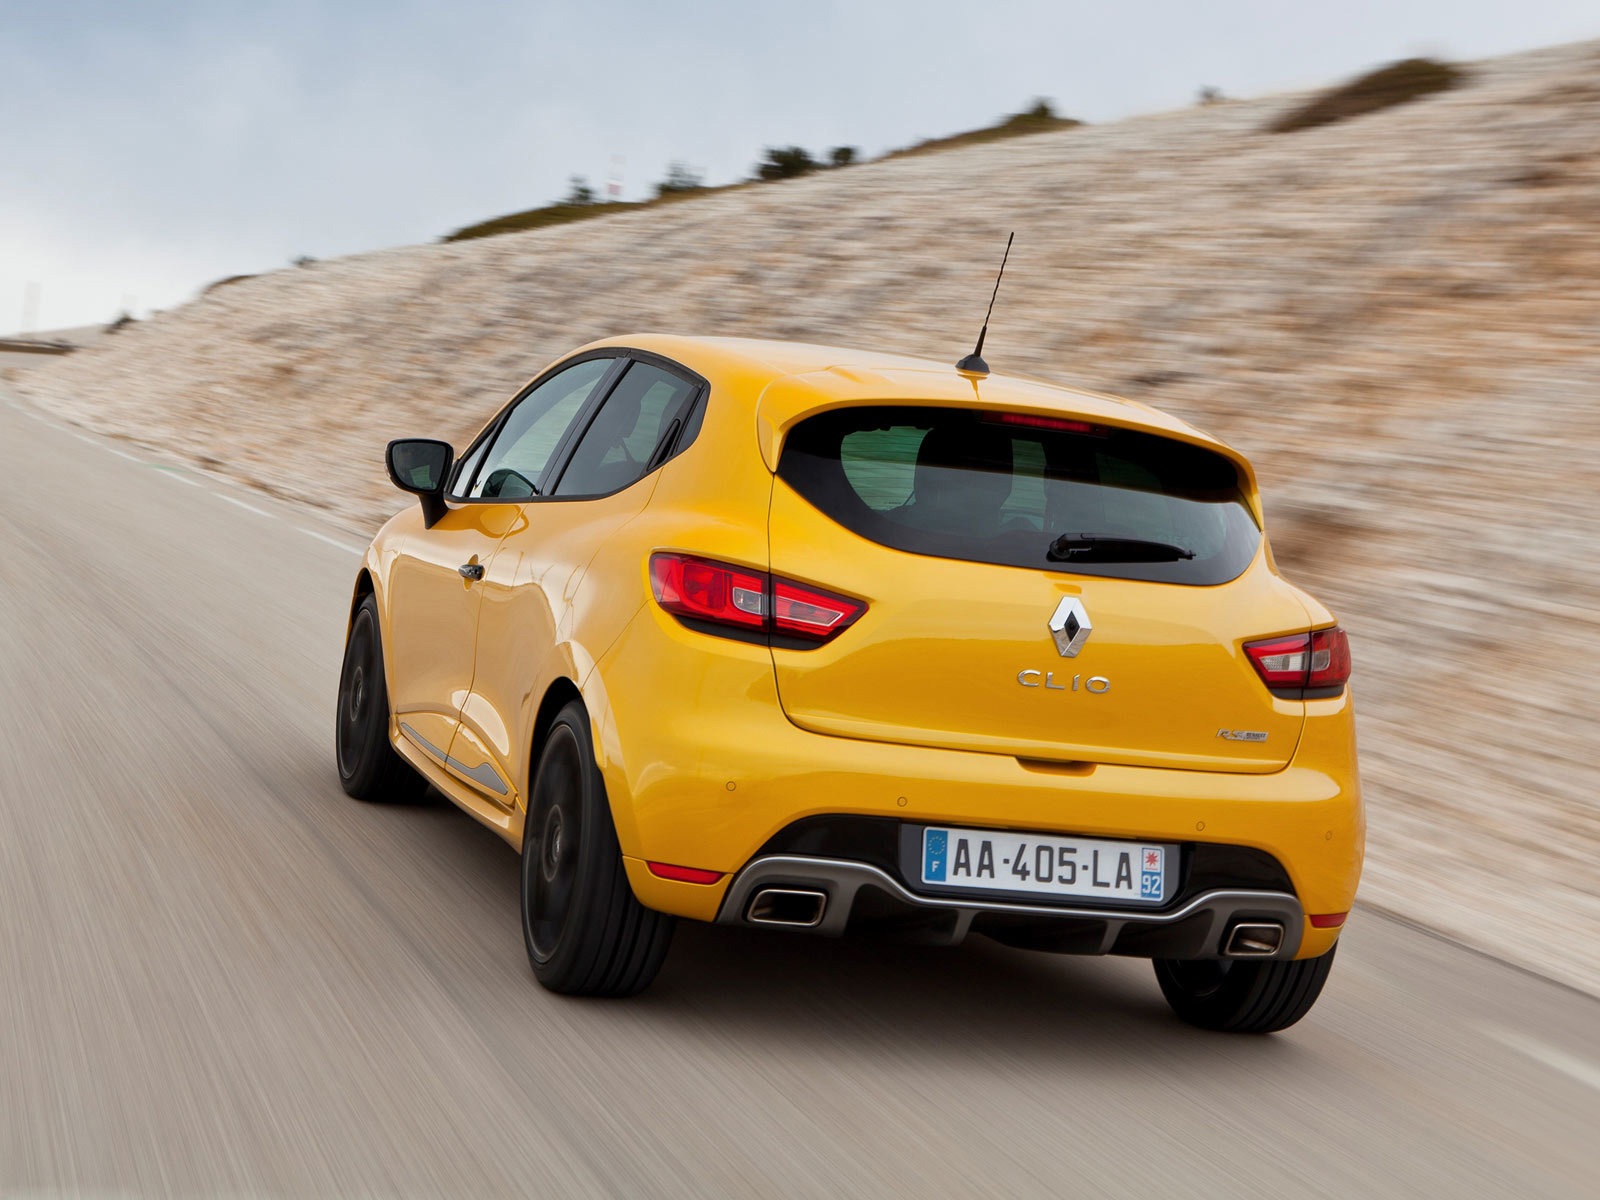 2013 Renault Clio RS 200 yellow color car HD wallpapers #11 - 1600x1200